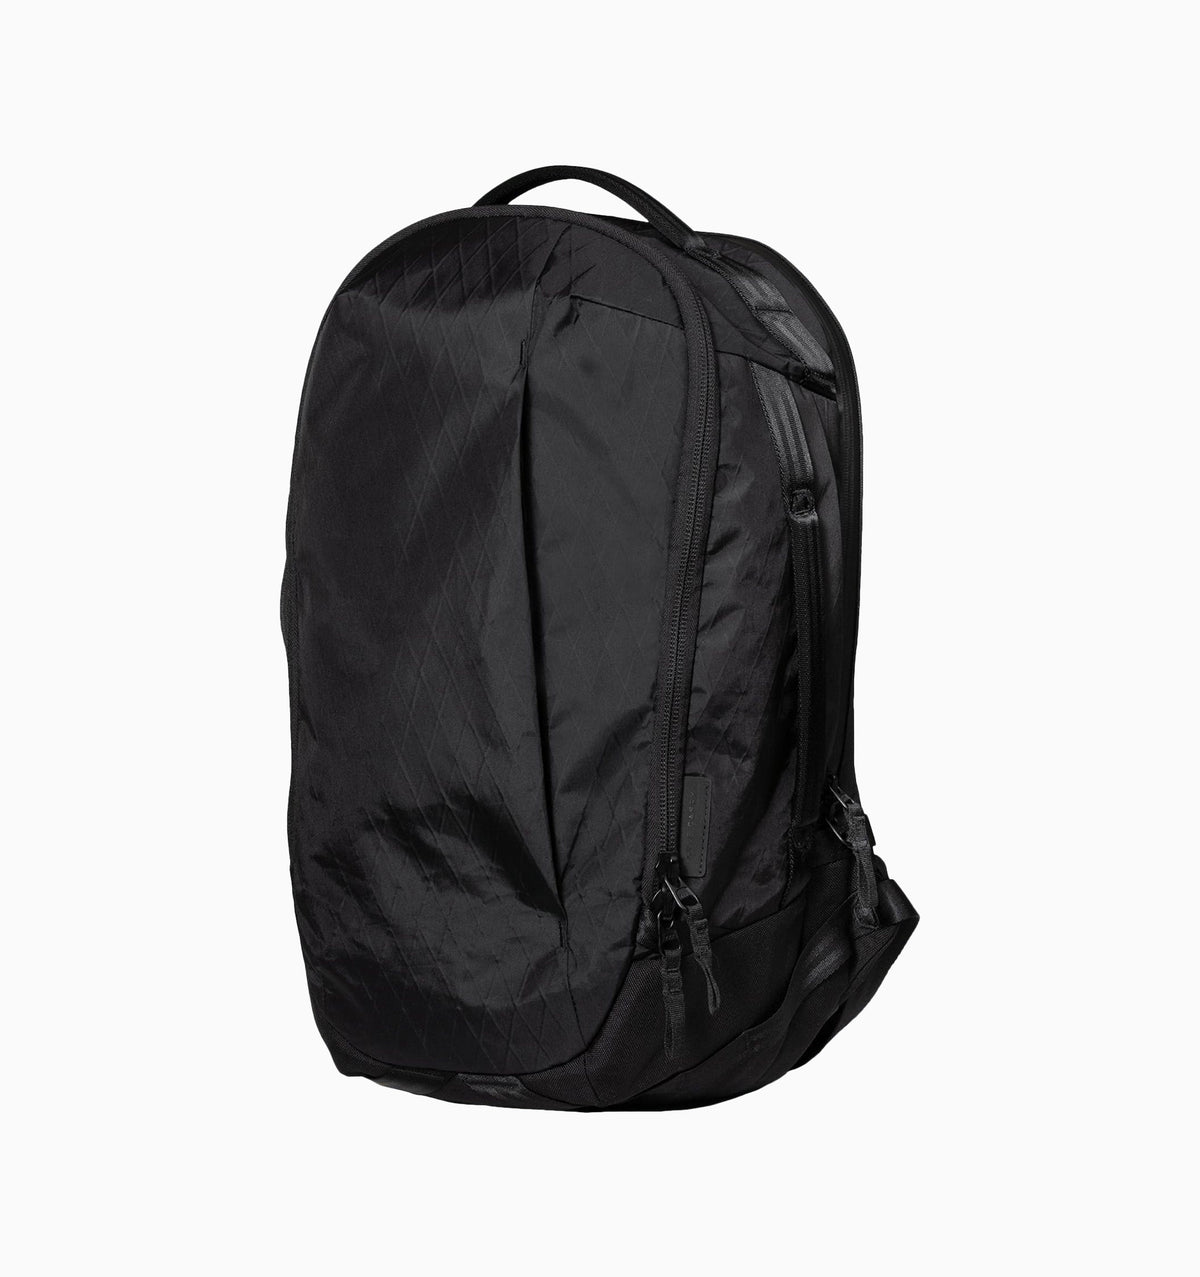 Able Carry 17" Max Backpack 30L - Tarmac Black